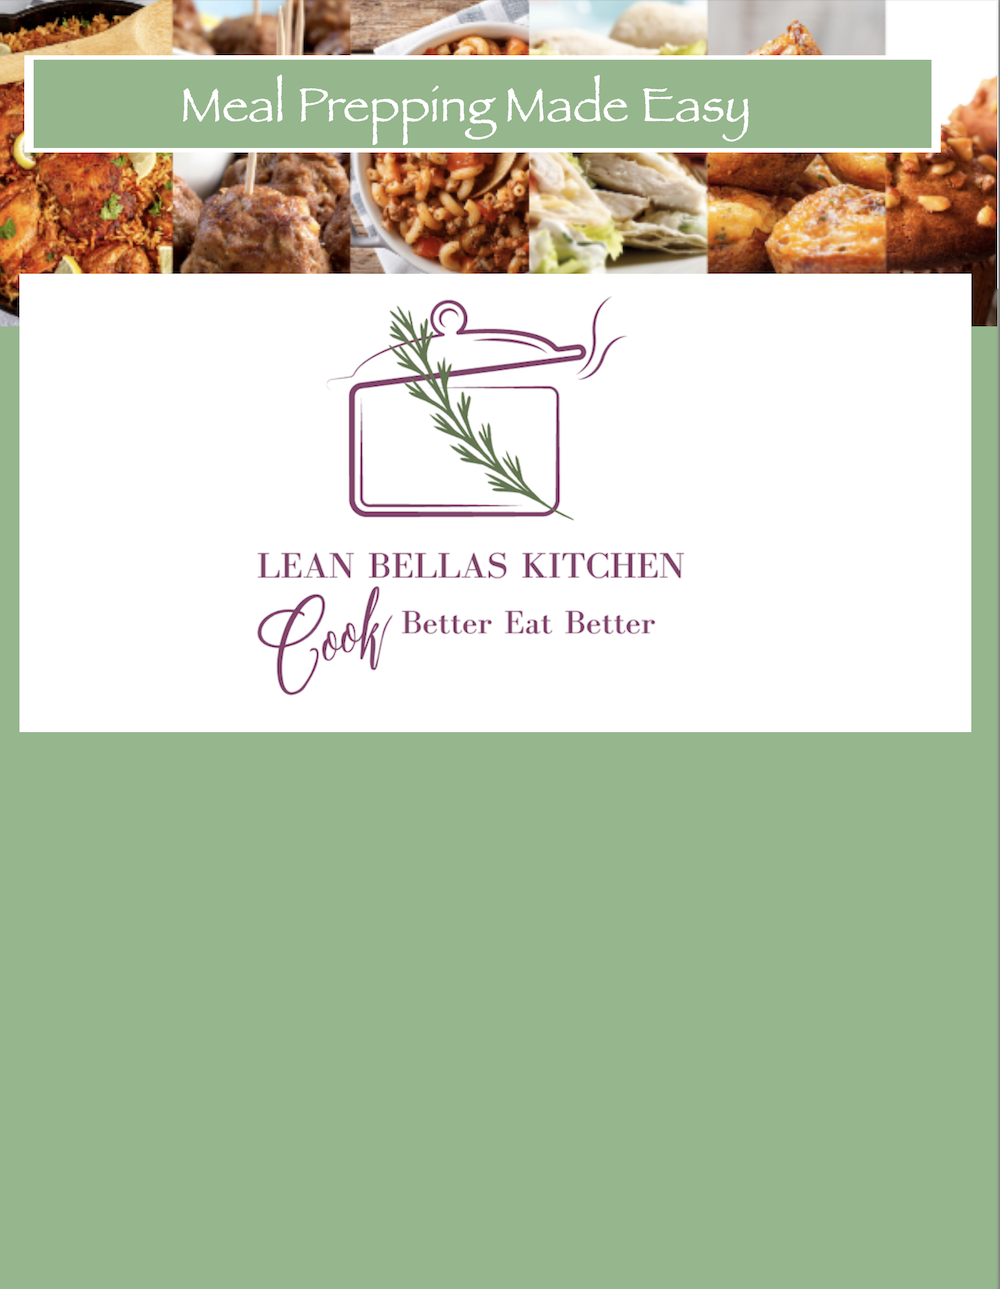 https://leanbellaskitchen.com/wp-content/uploads/2022/01/meal-prepping-introduction-cover.png